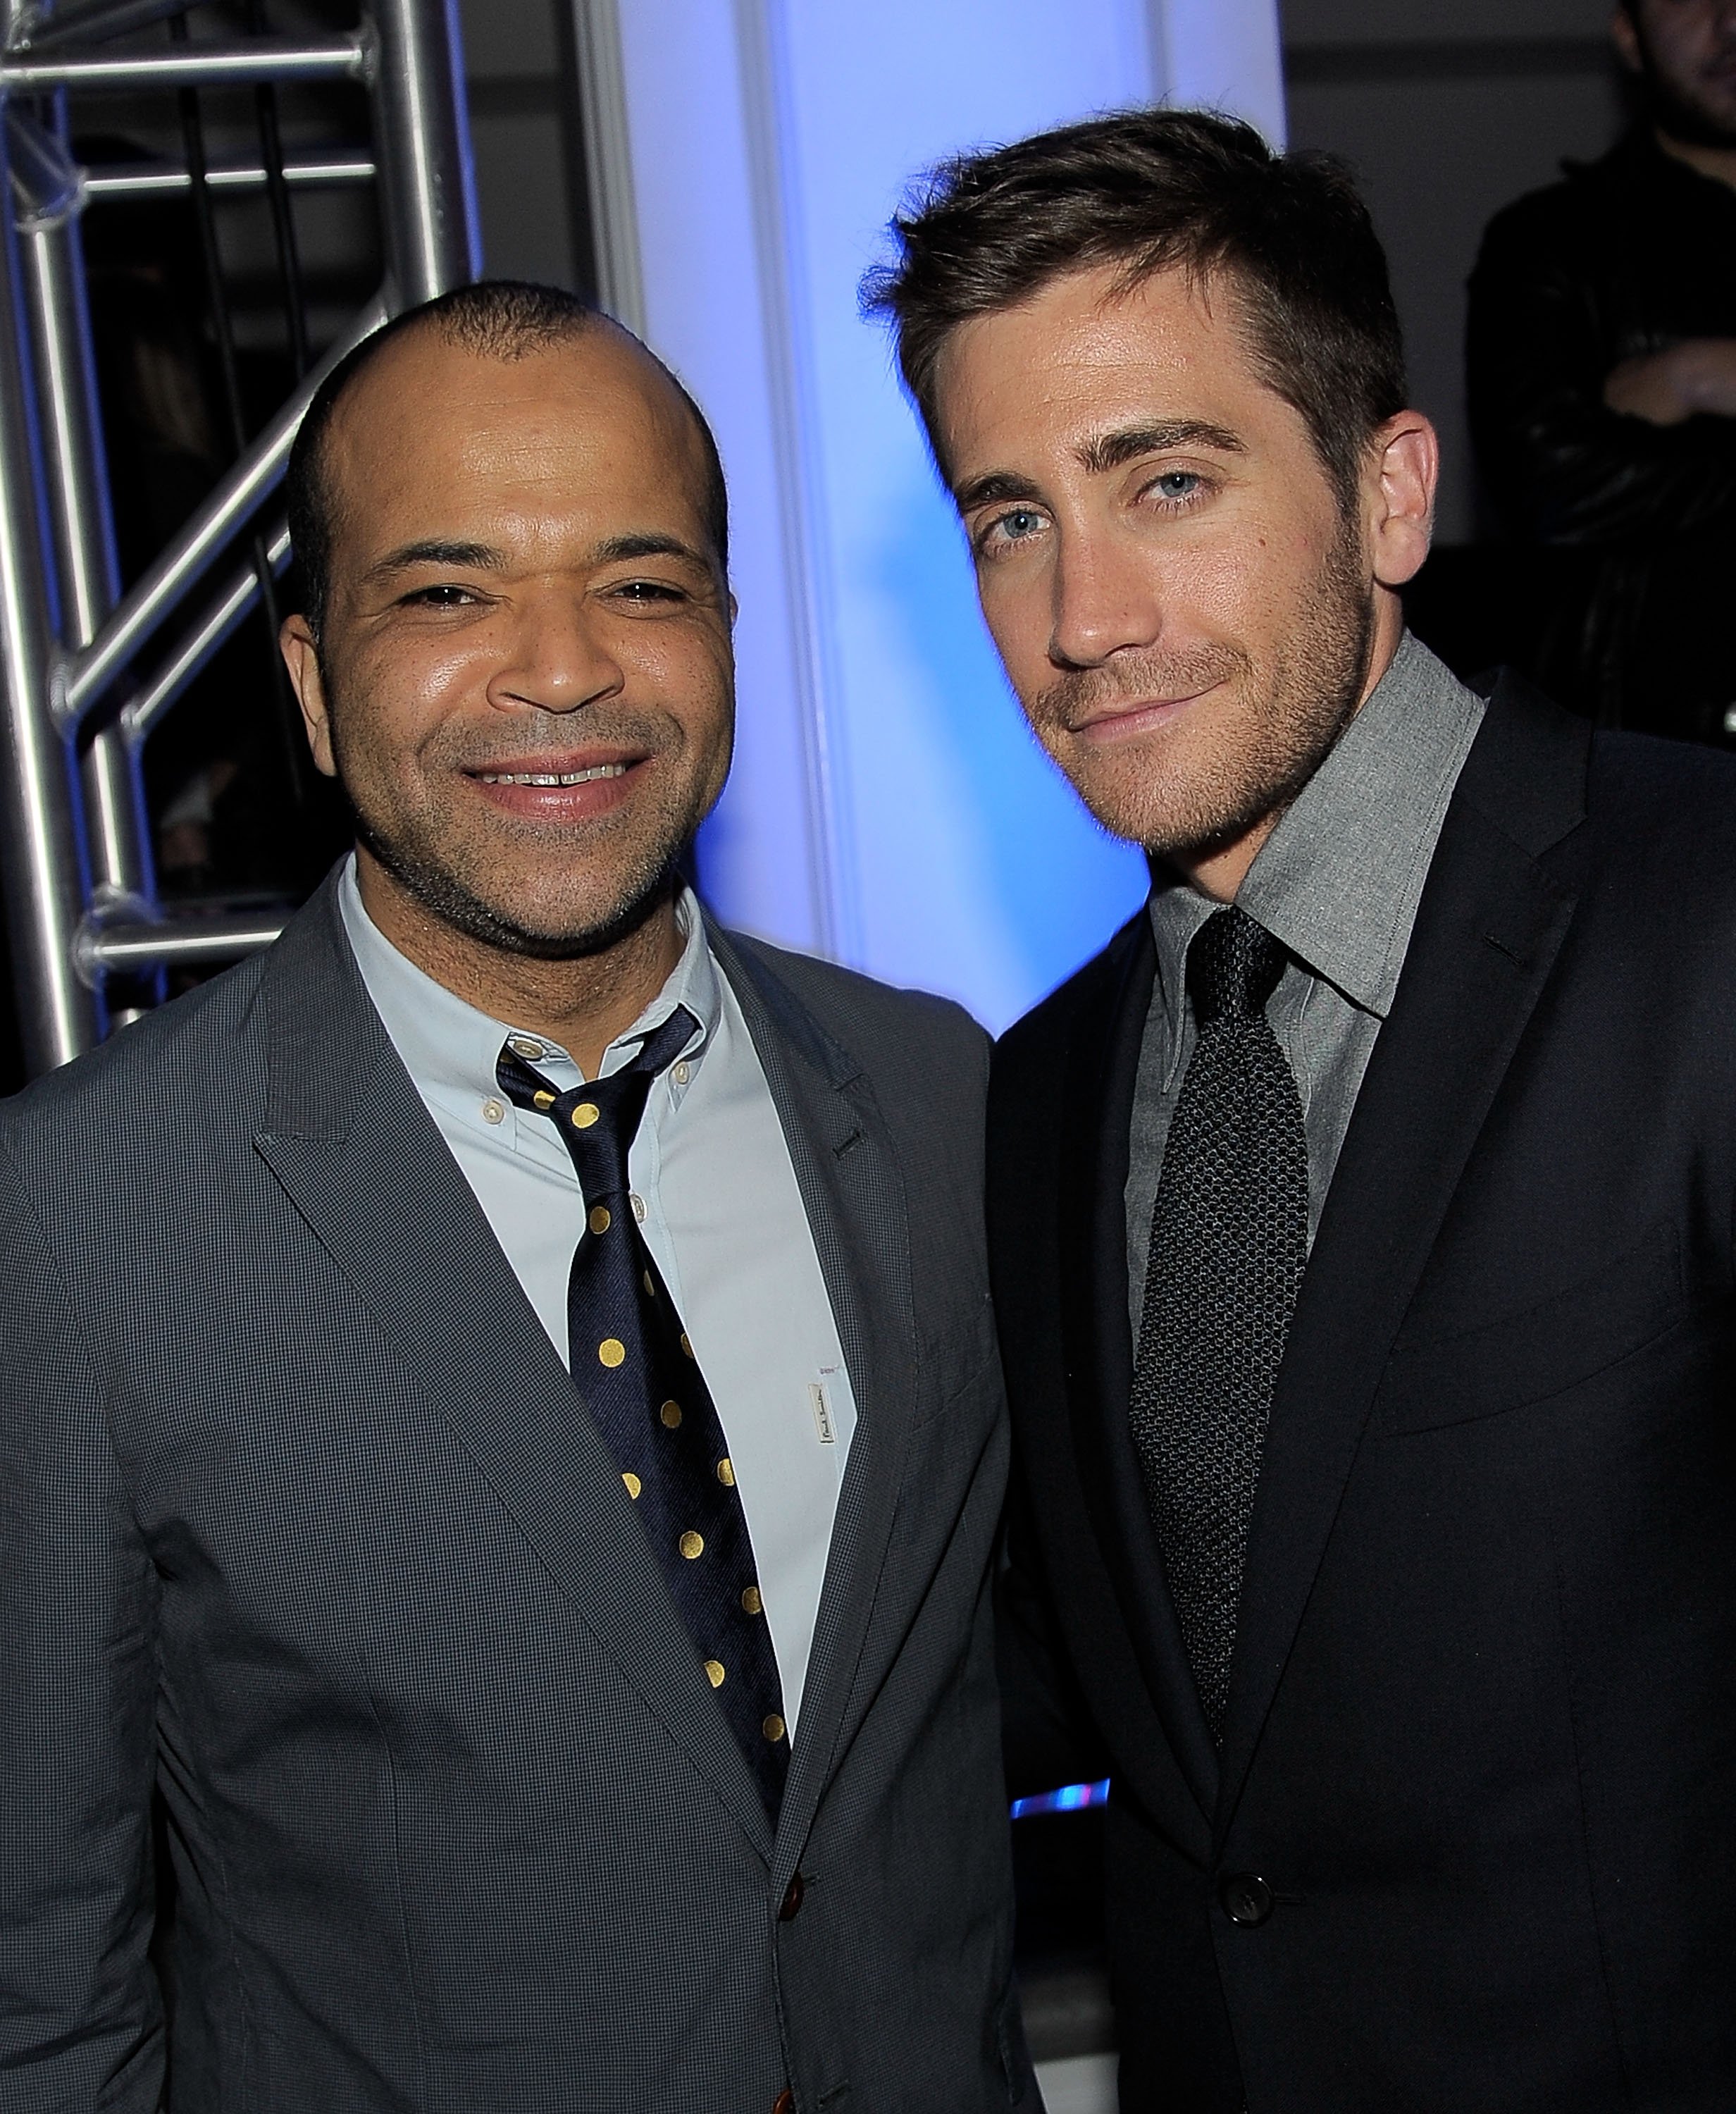 Jeffrey Wright and Jake Gyllenhaal attend the after-party following the premiere of Summit Entertainment's 'Source Code' on March 28, 2011 in Los Angeles, California. | Source: Getty Images